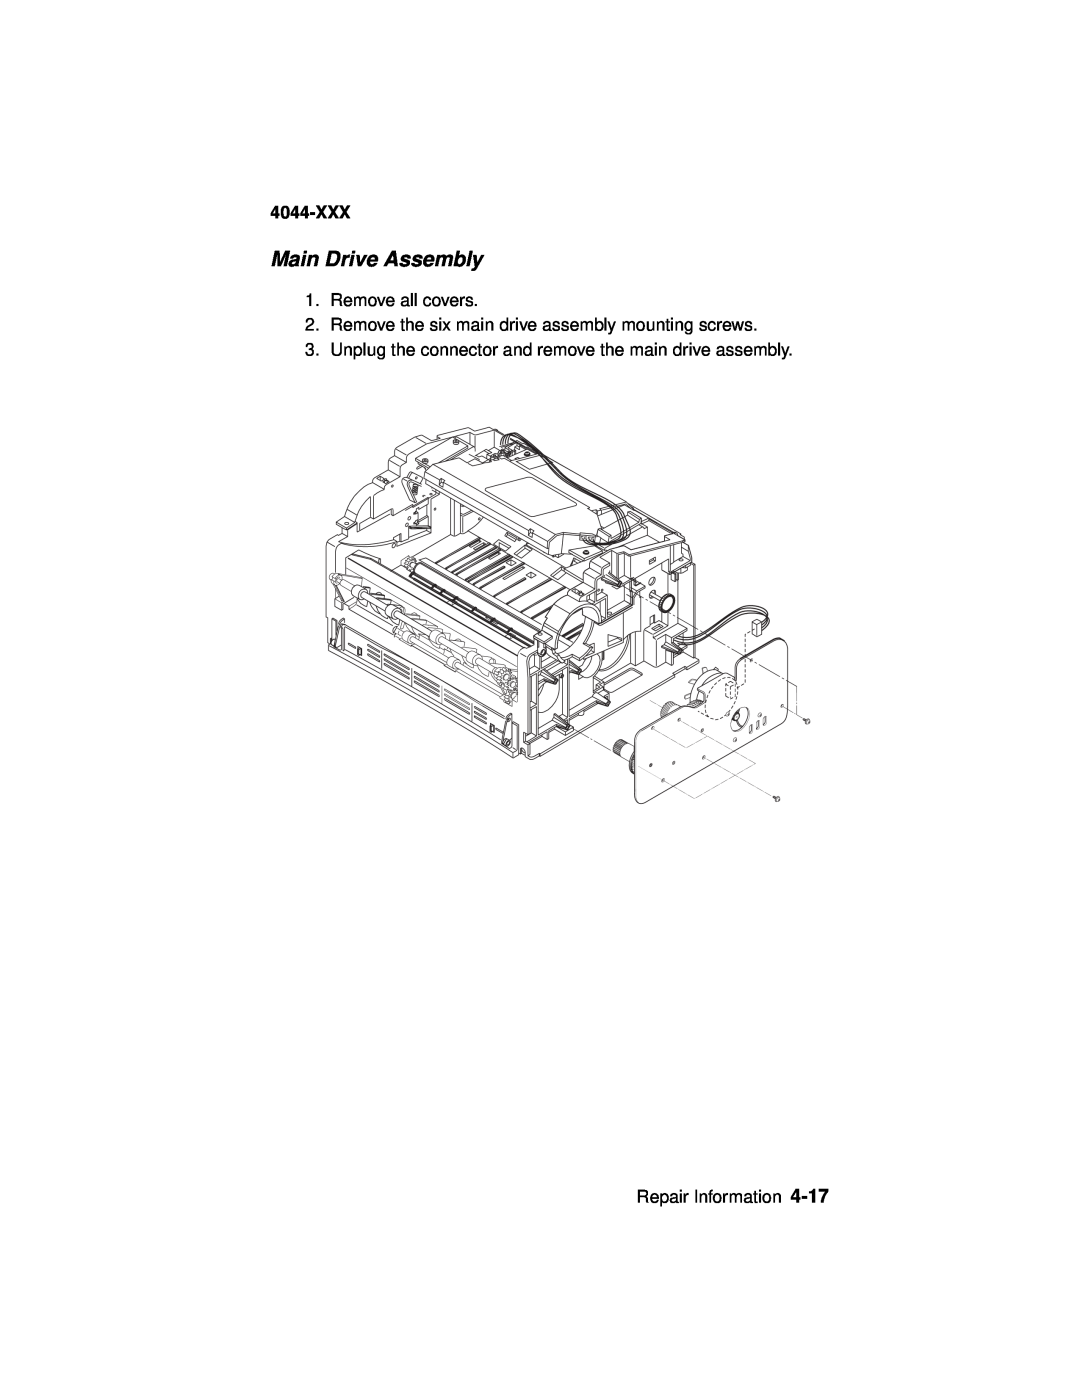 Lexmark E310 manual Main Drive Assembly, 4044-XXX, Remove all covers, Repair Information 